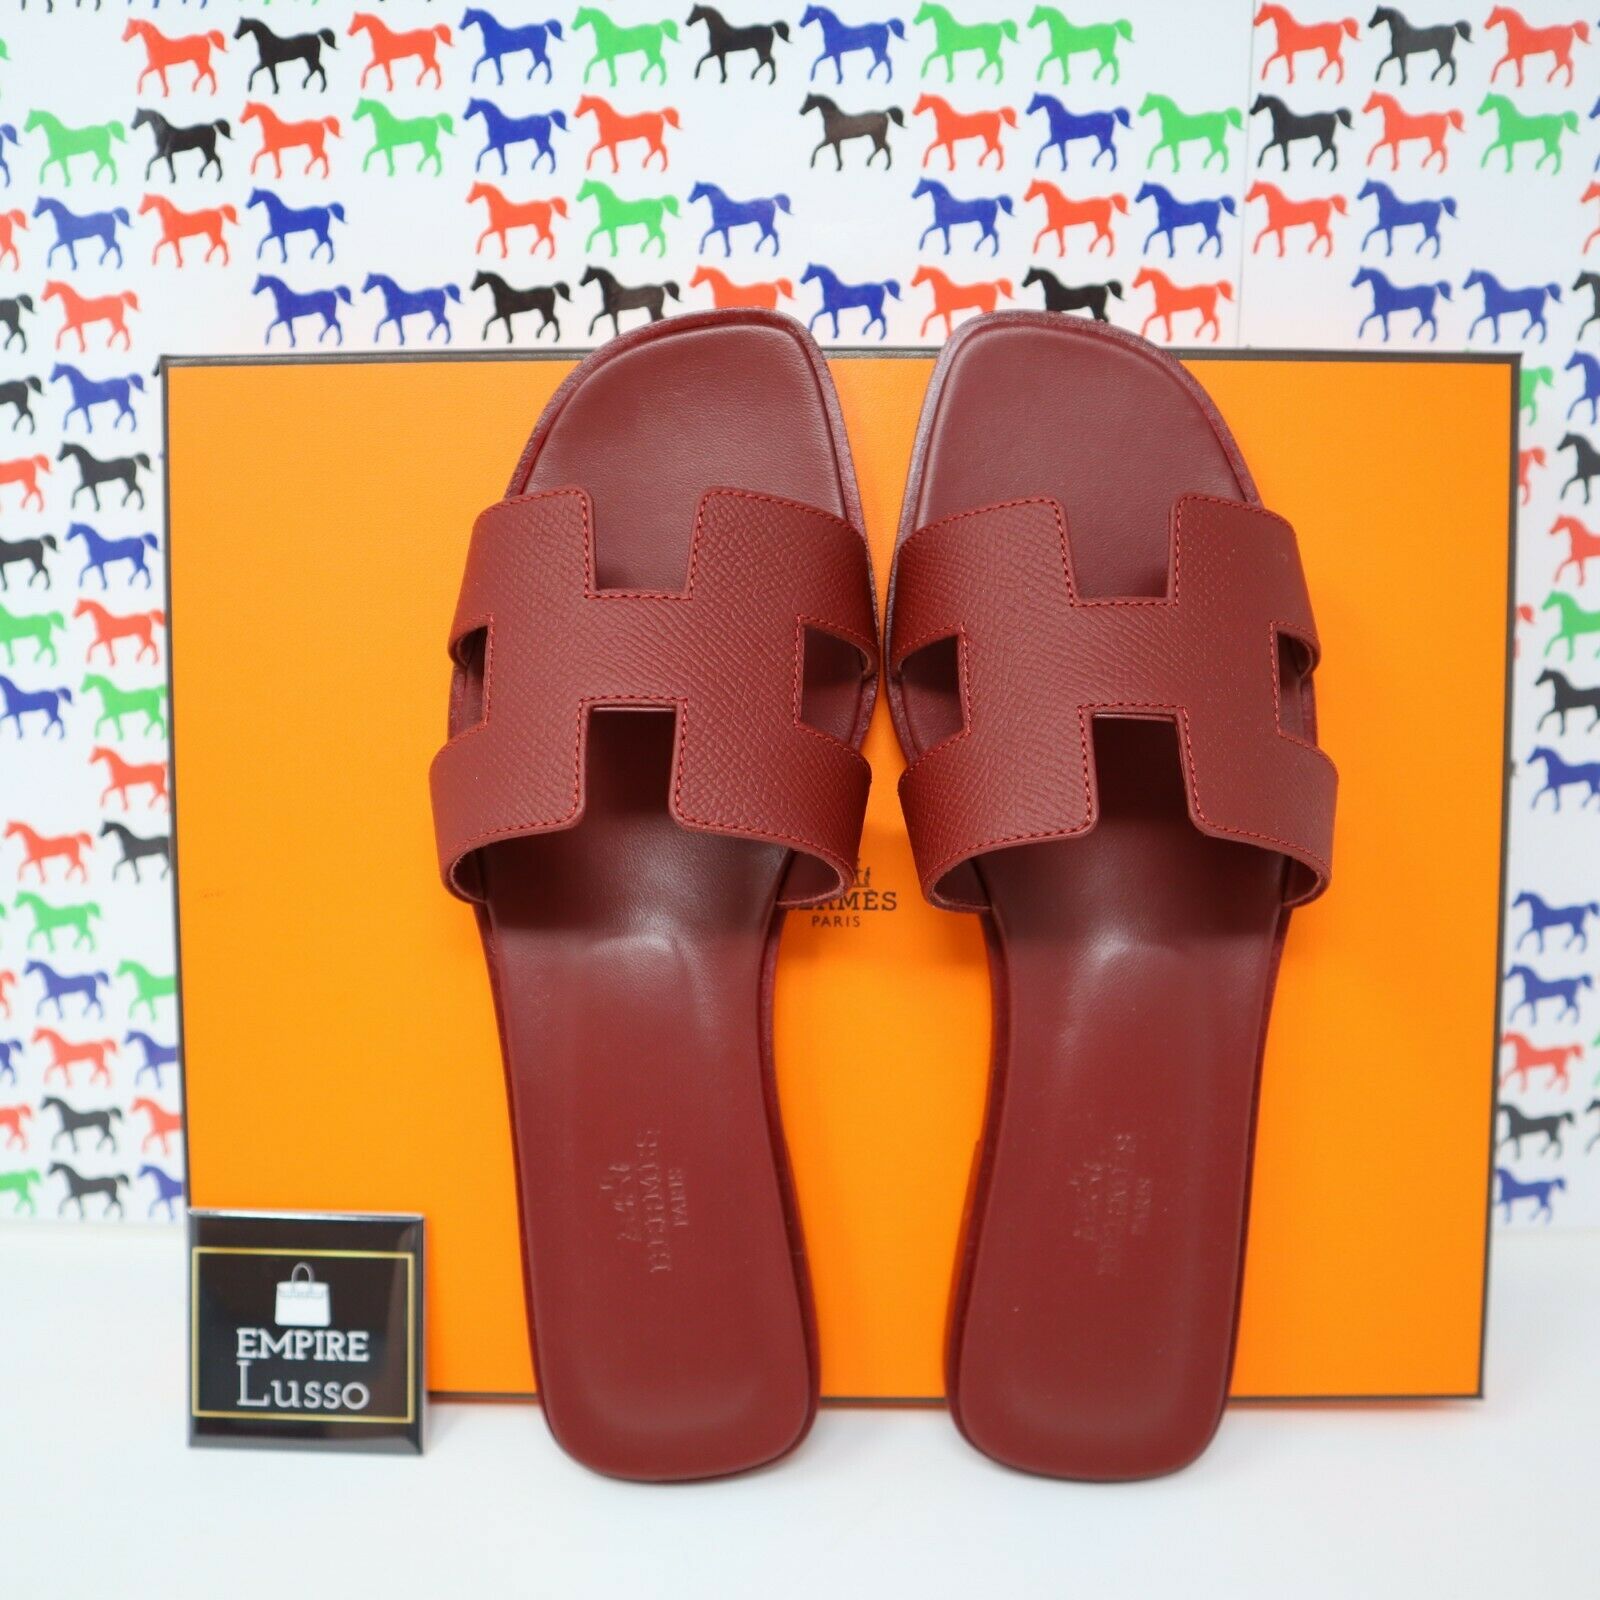 Oran Hermès (Rouge H)  Girly shoes, Hermes shoes, Fashion slippers